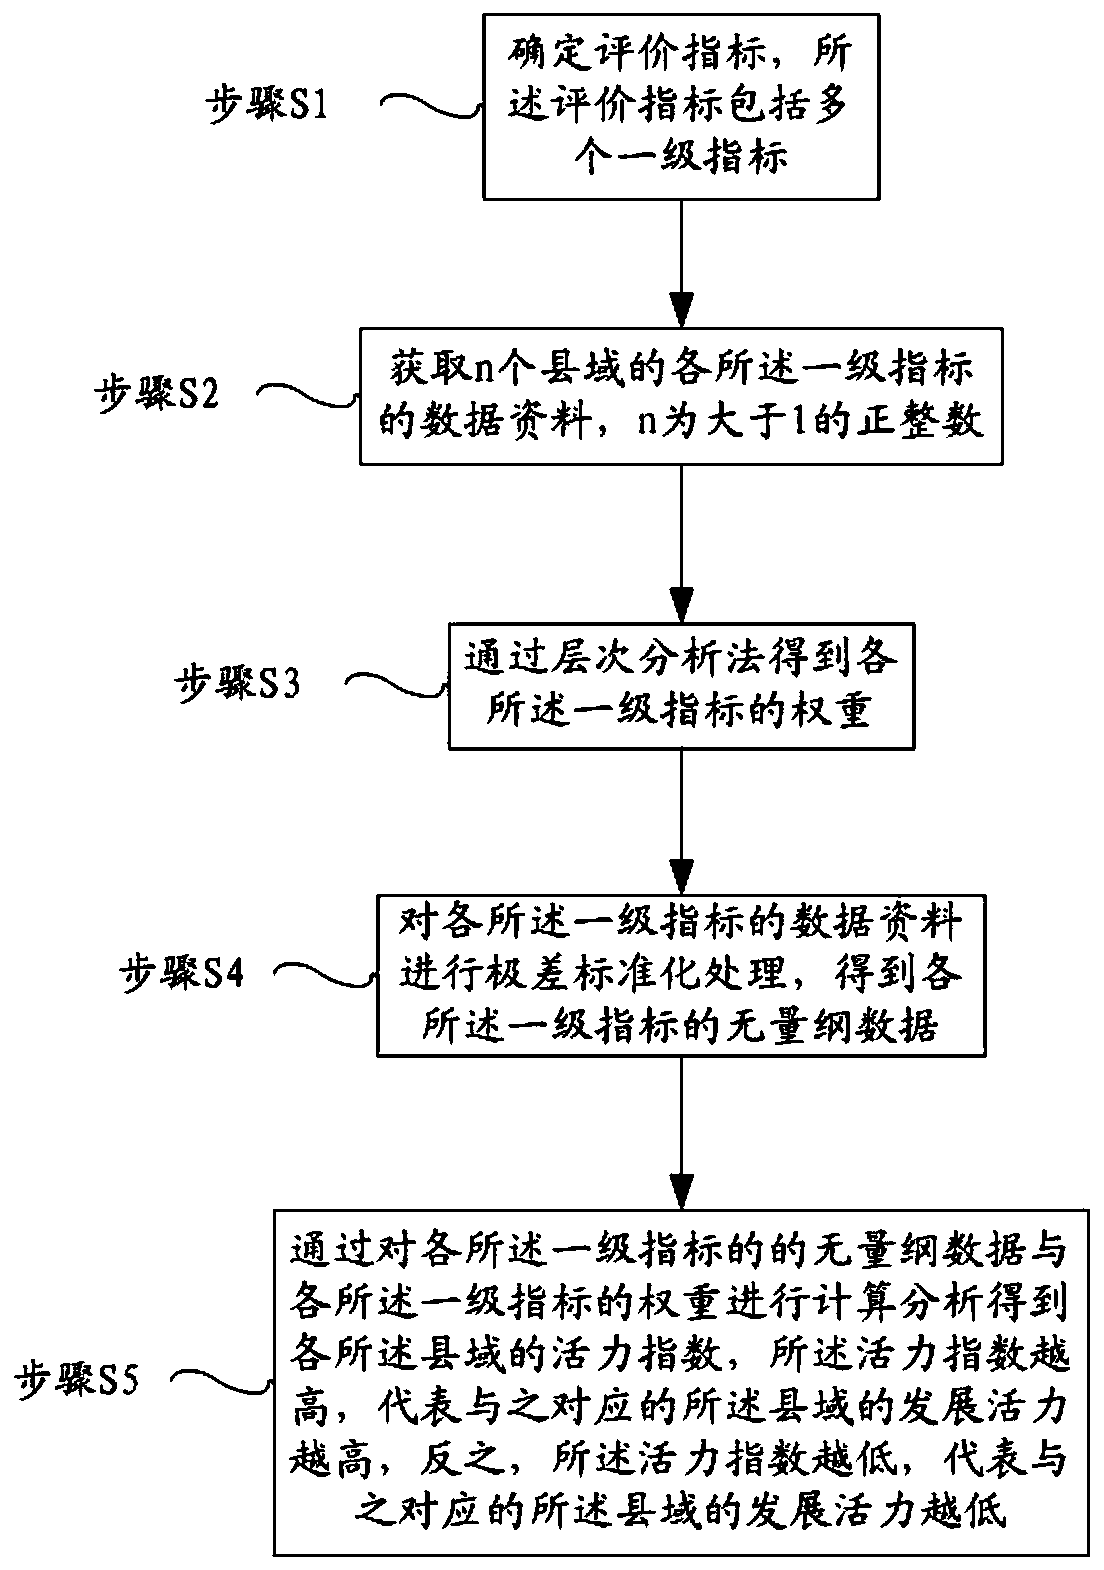 County development vitality evaluation method and problem county classification statistical method